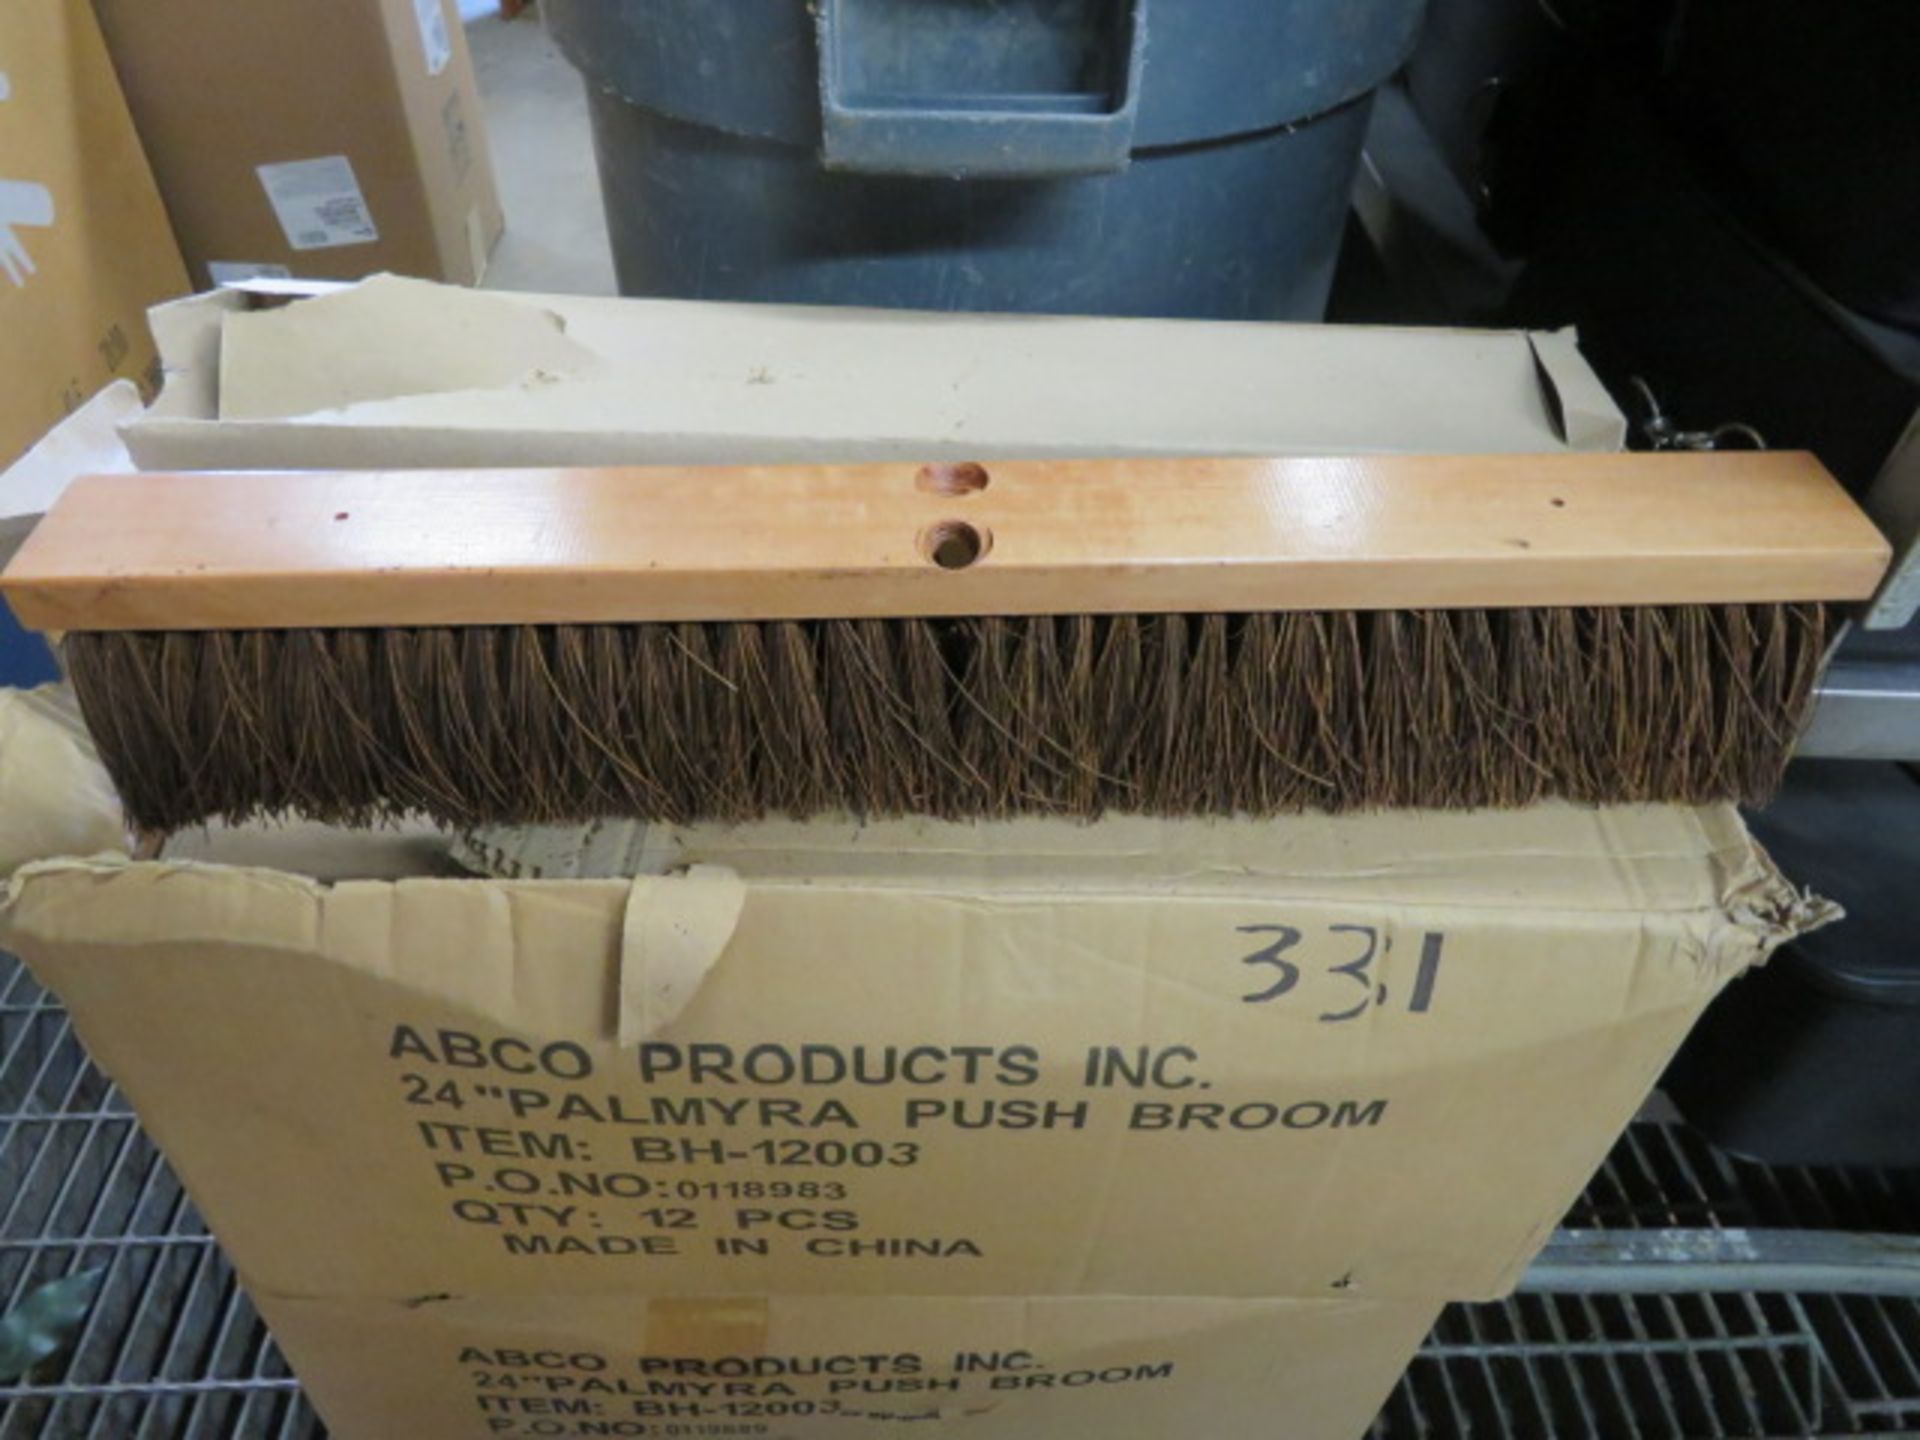 WOOD HANDLE STRAW BROOMS & (24) 24" PALMYRA PUSH BROOM HEADS W/ TRASH CAN (LOCATED IN WILLOW GROVE) - Image 4 of 4